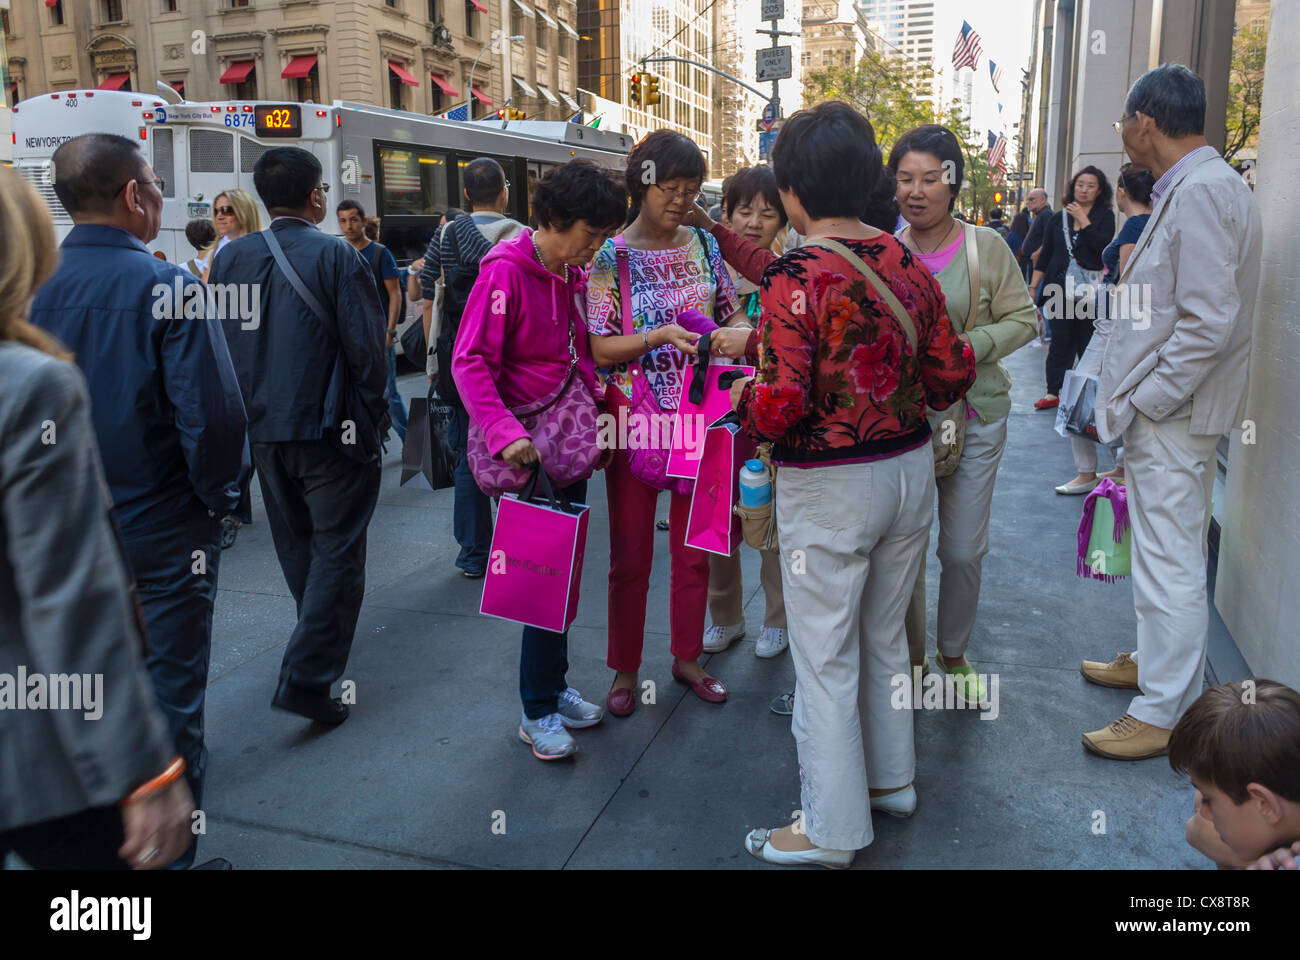 New York, NY, USA, Large Crowd of People, Chinese Women Shopping, Street Scenes, Luxury Shops on Fifth Avenue, Manhattan ny streets, crowded sidewalk new york Stock Photo